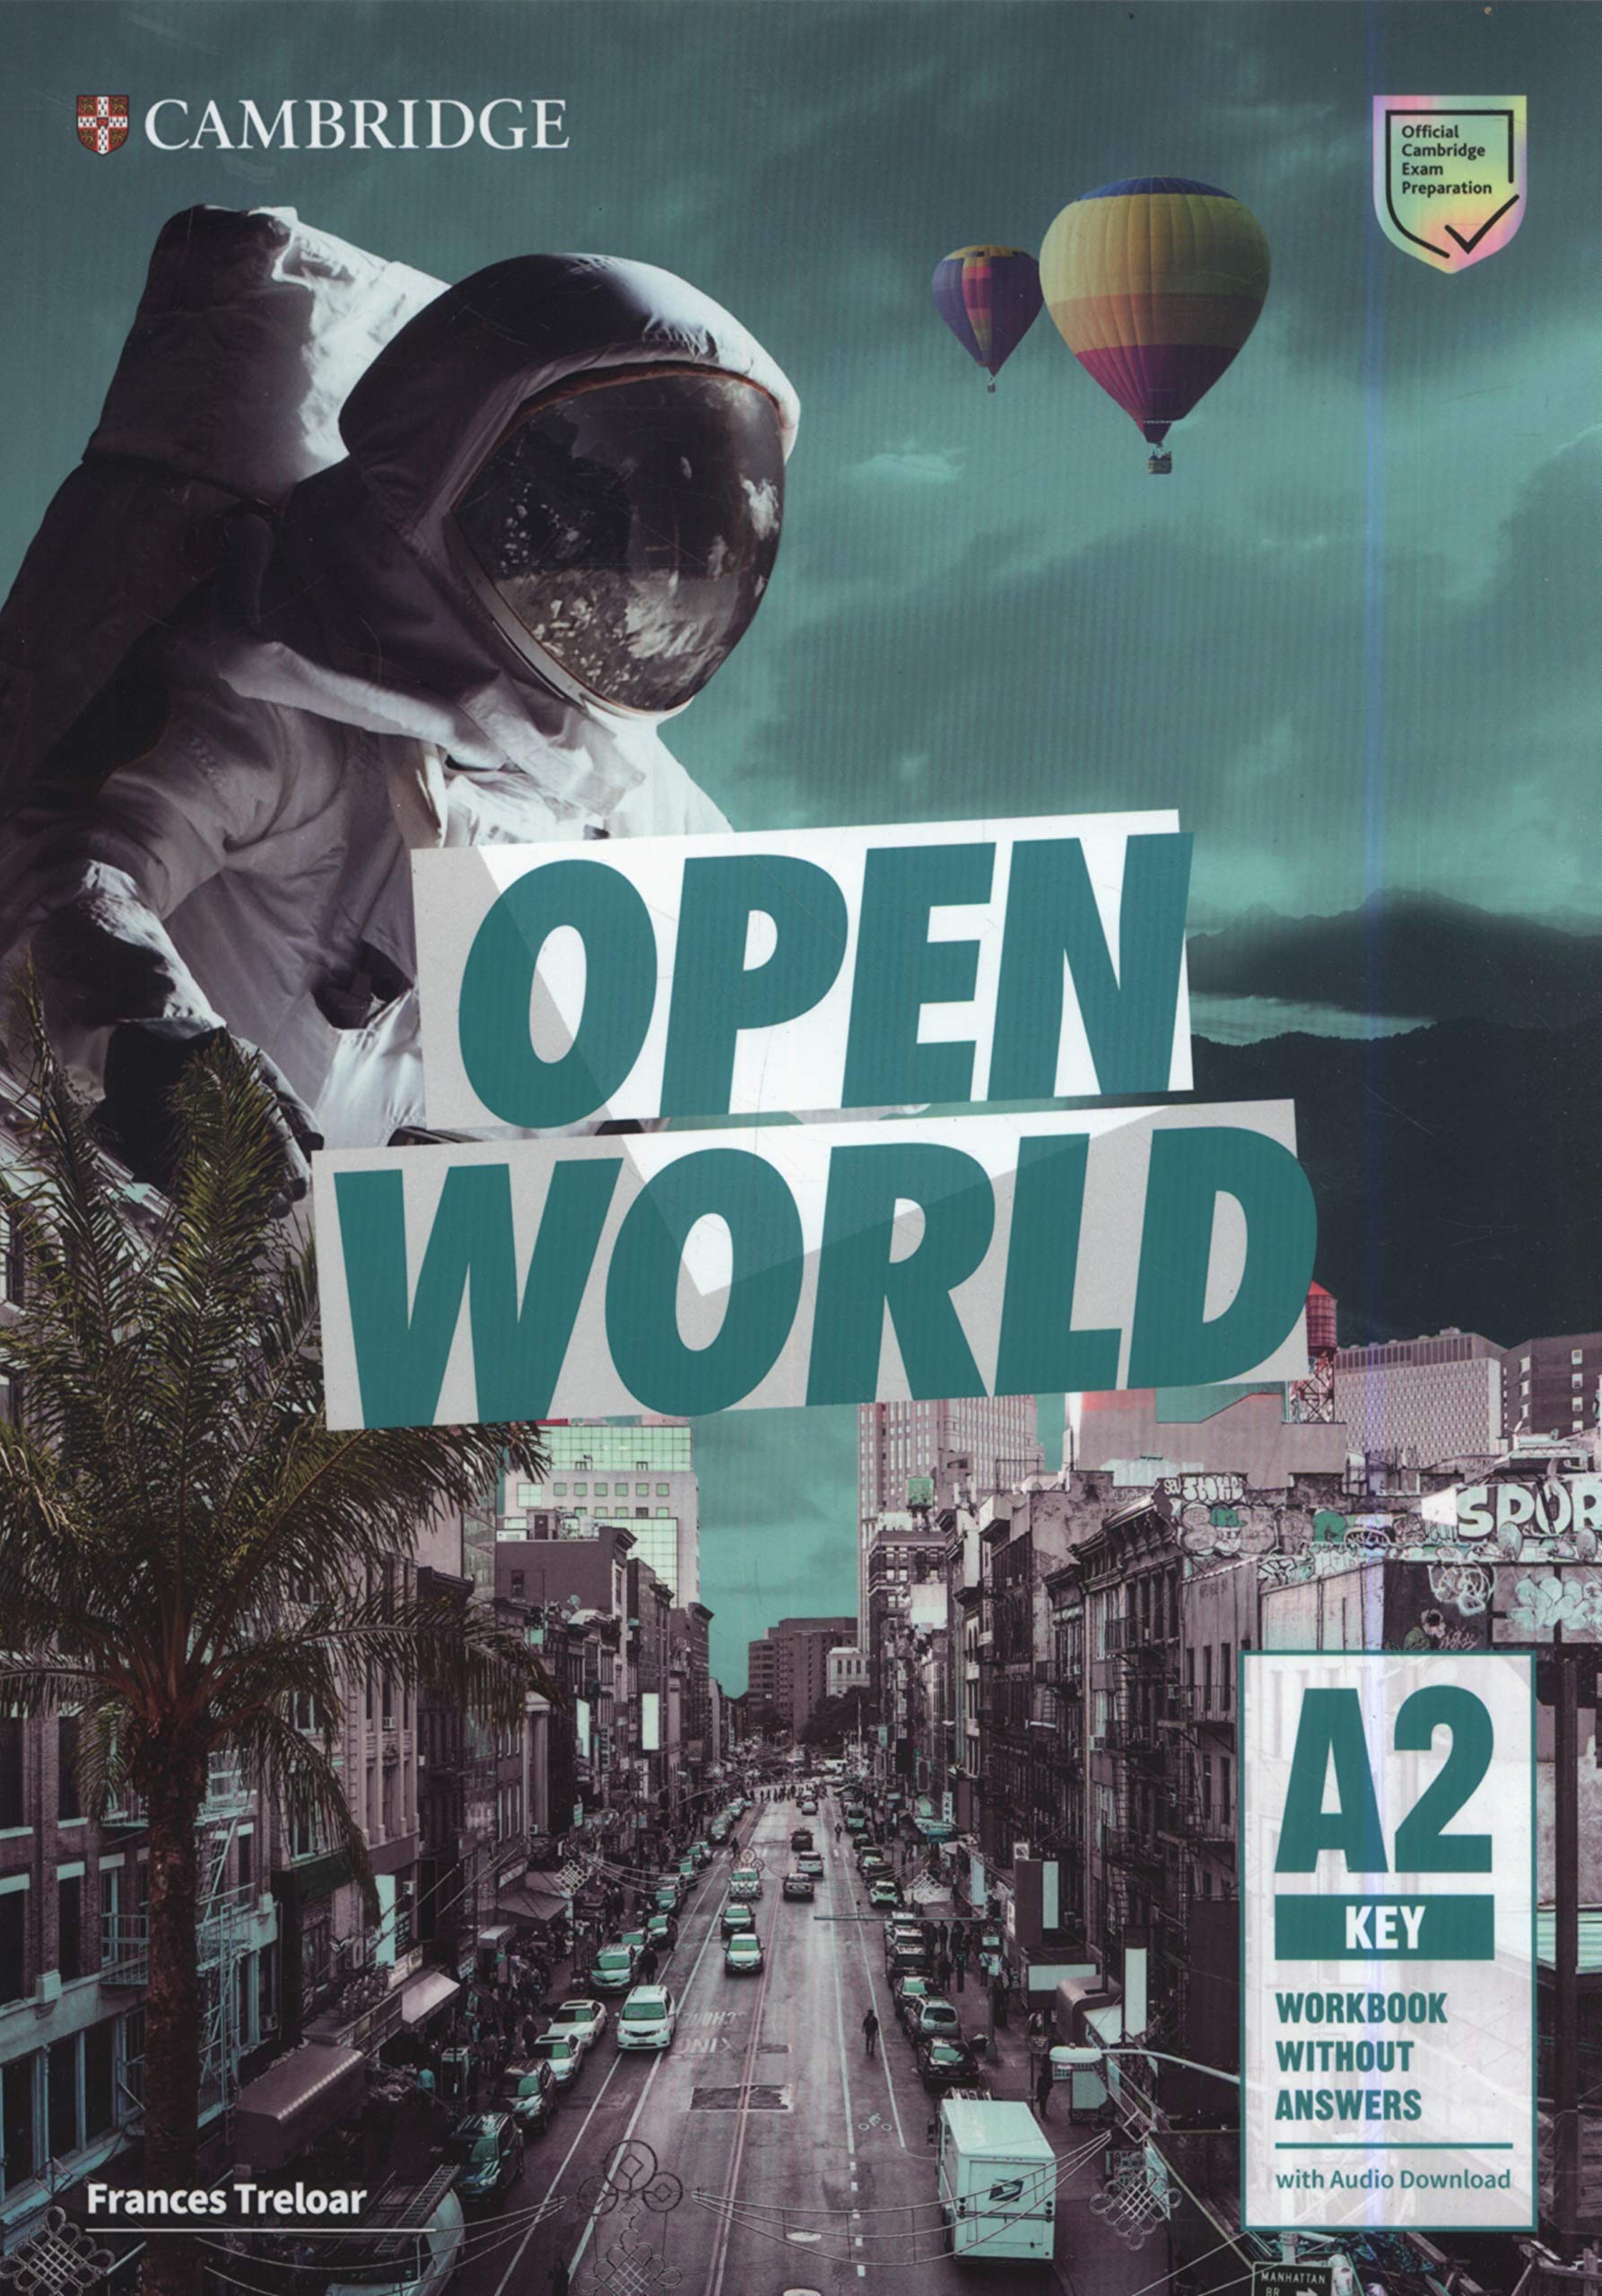 OPEN WORLD KEY Workbook without Answers + Audio Download